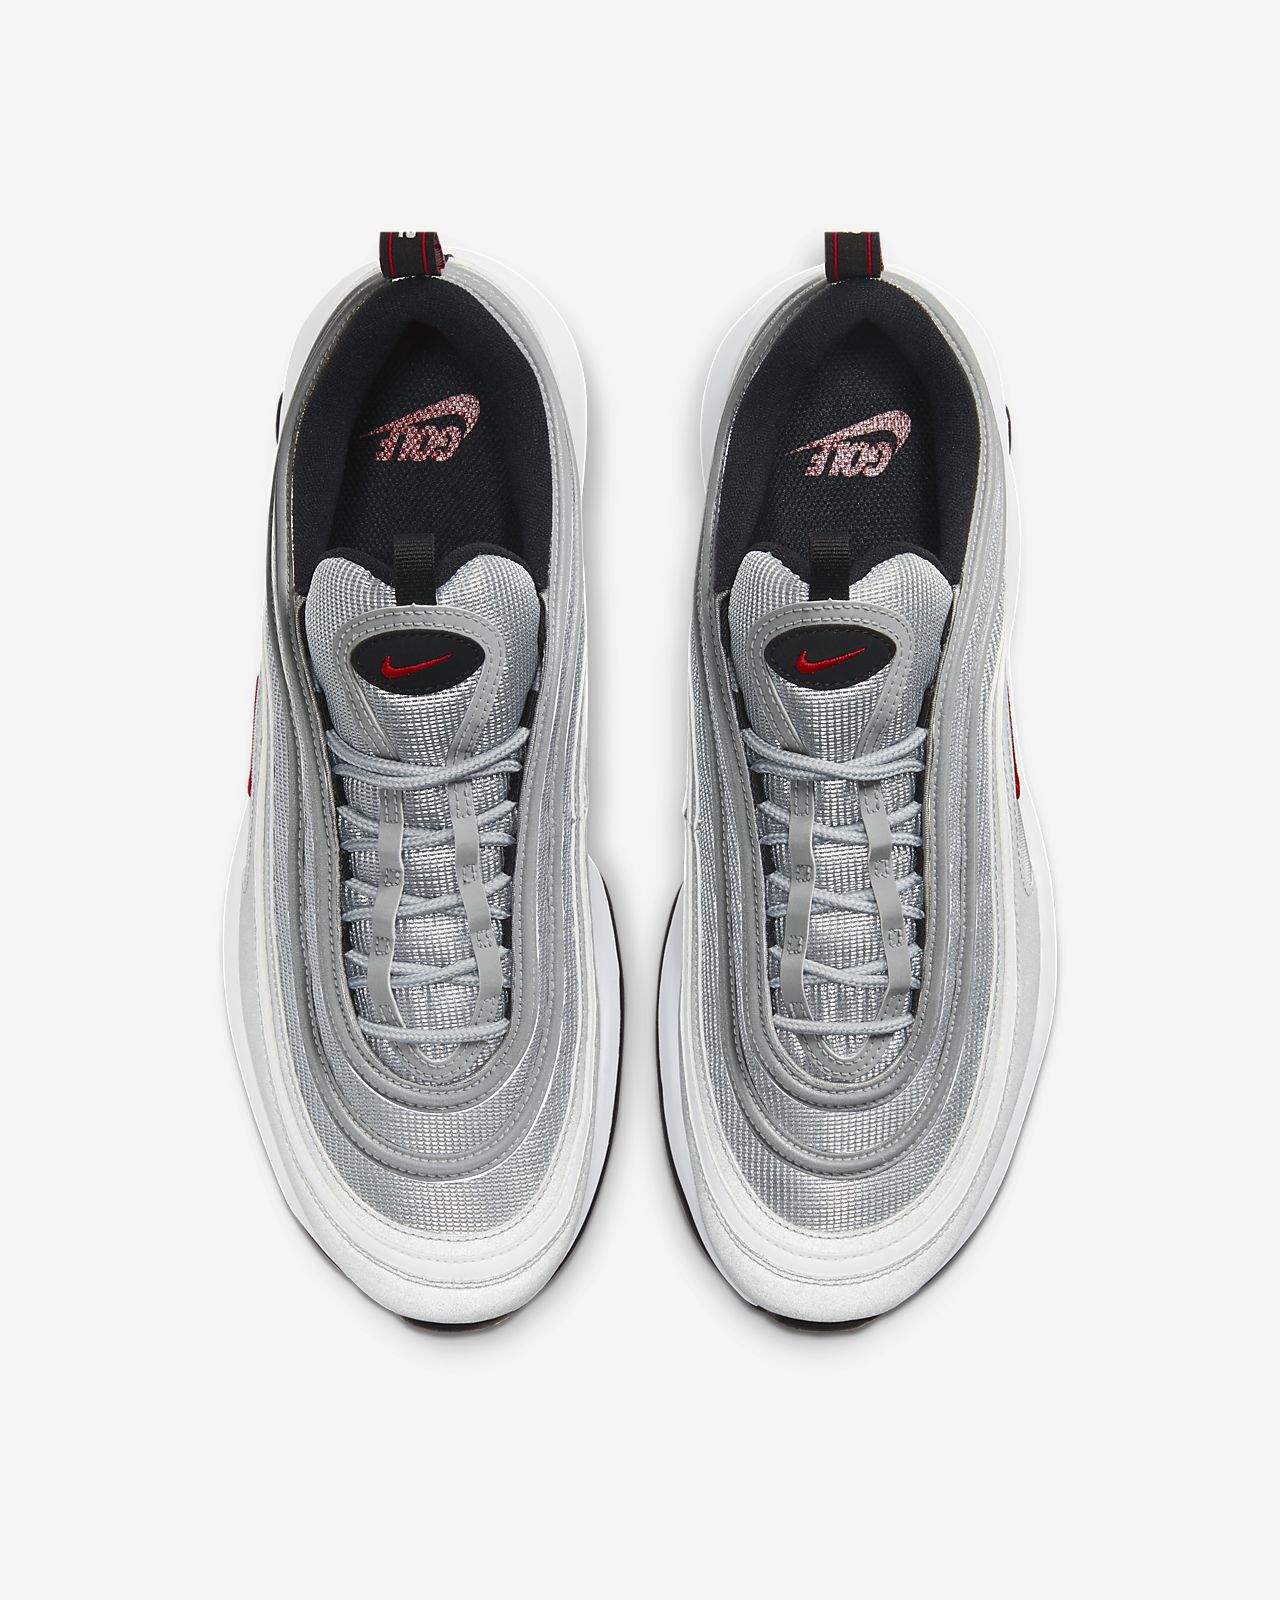 nike air max 97 junior for sale ecff1 3cce1